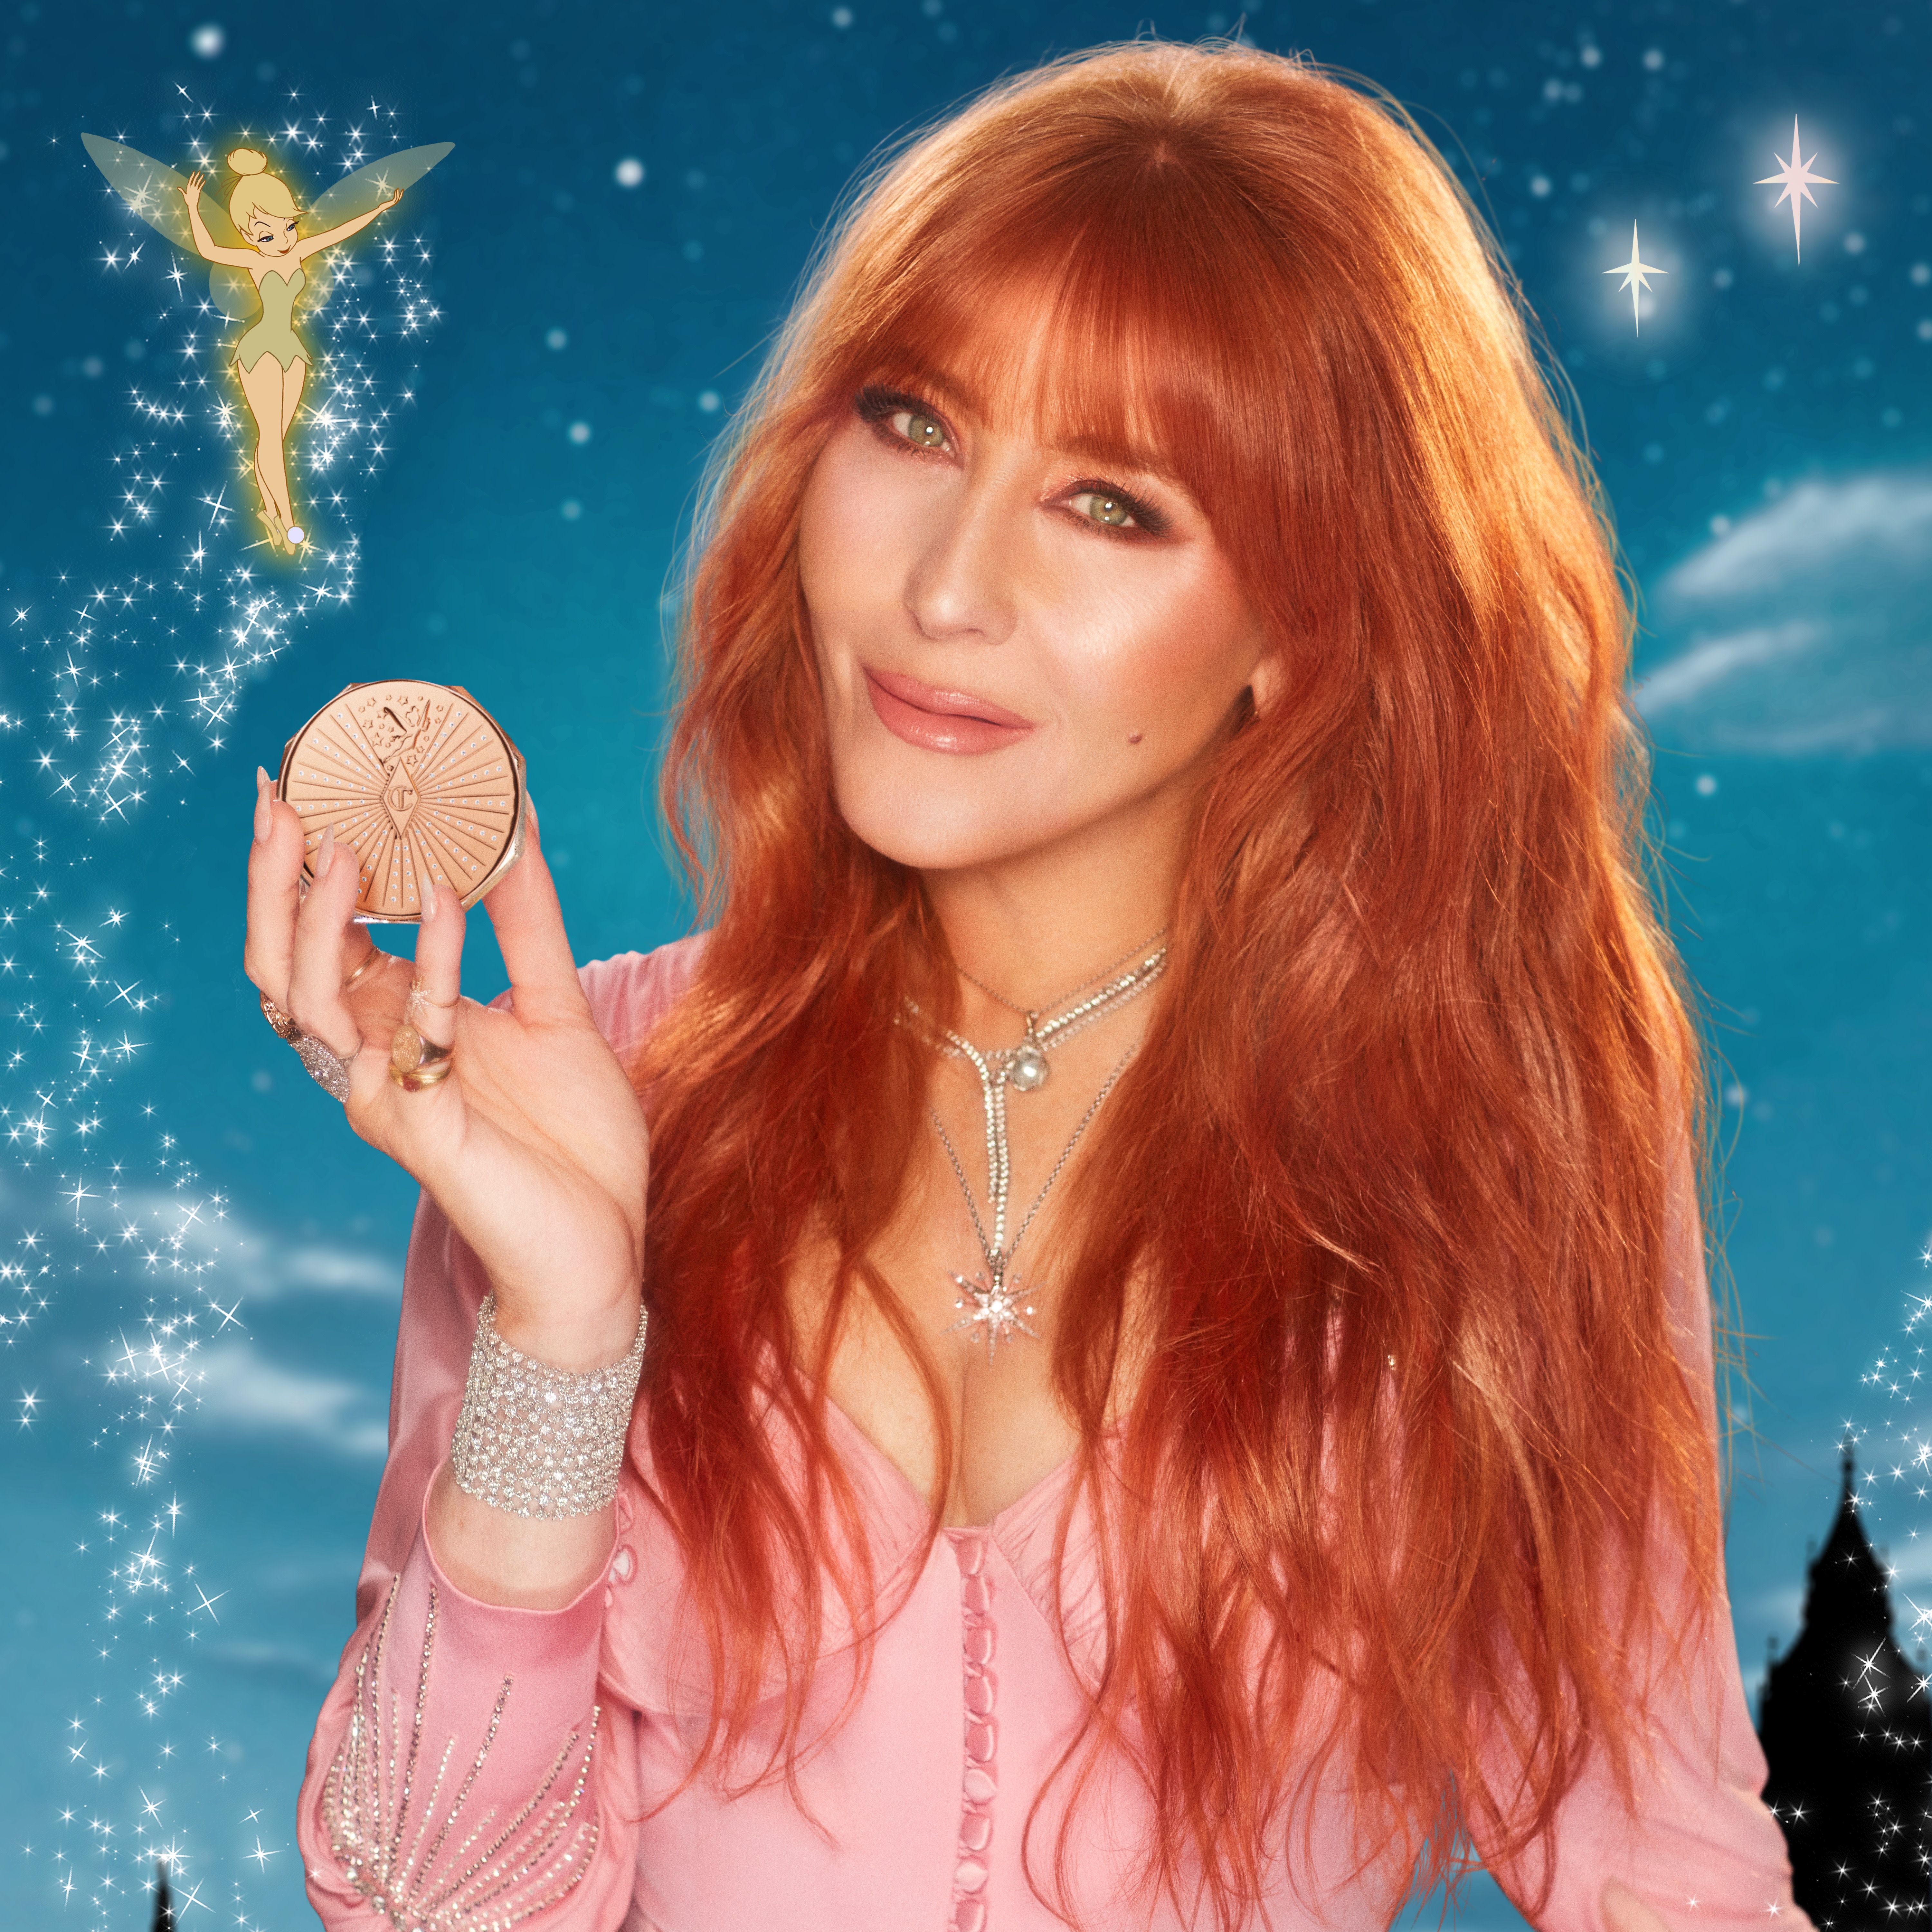 Charlotte Tilbury revealing her collaboration with Disney100